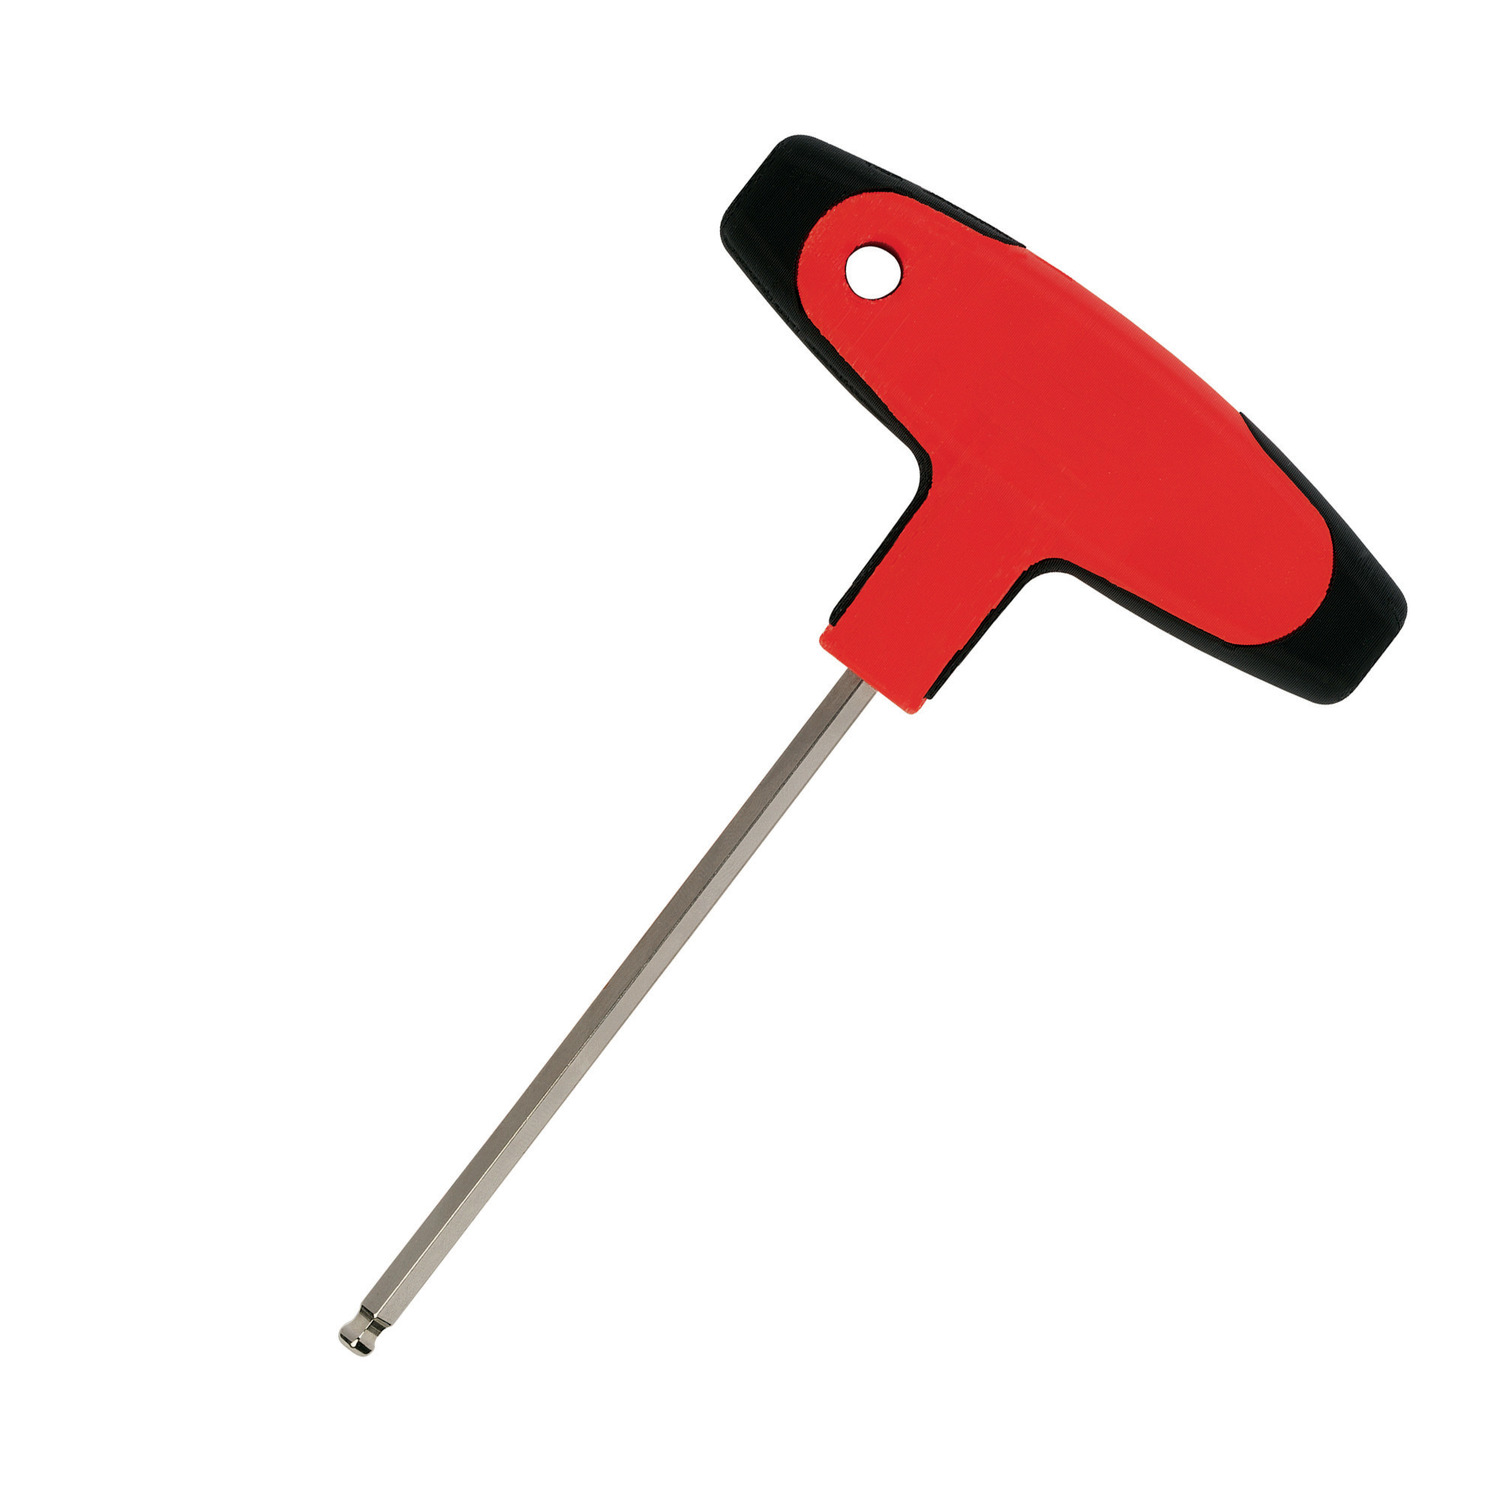 Product 90520, T-handled Hex. Keys ball-ended / 